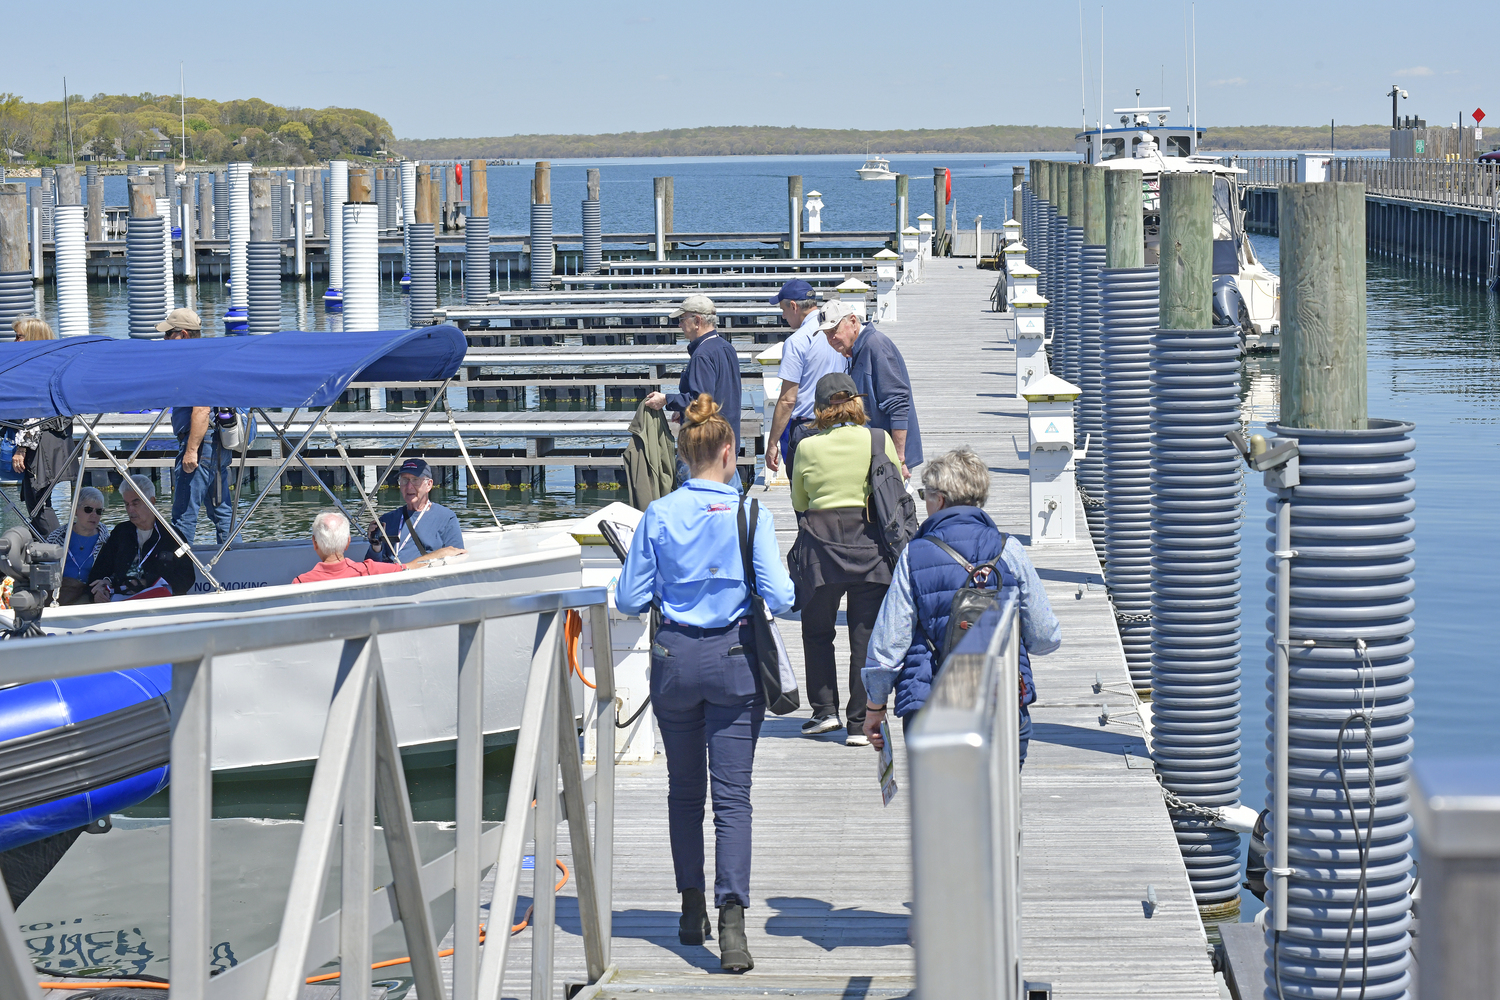 American Cruise Line passengers board their launch back to their ship at the dock in Sag Harbor on Tuesday.   DANA SHAW